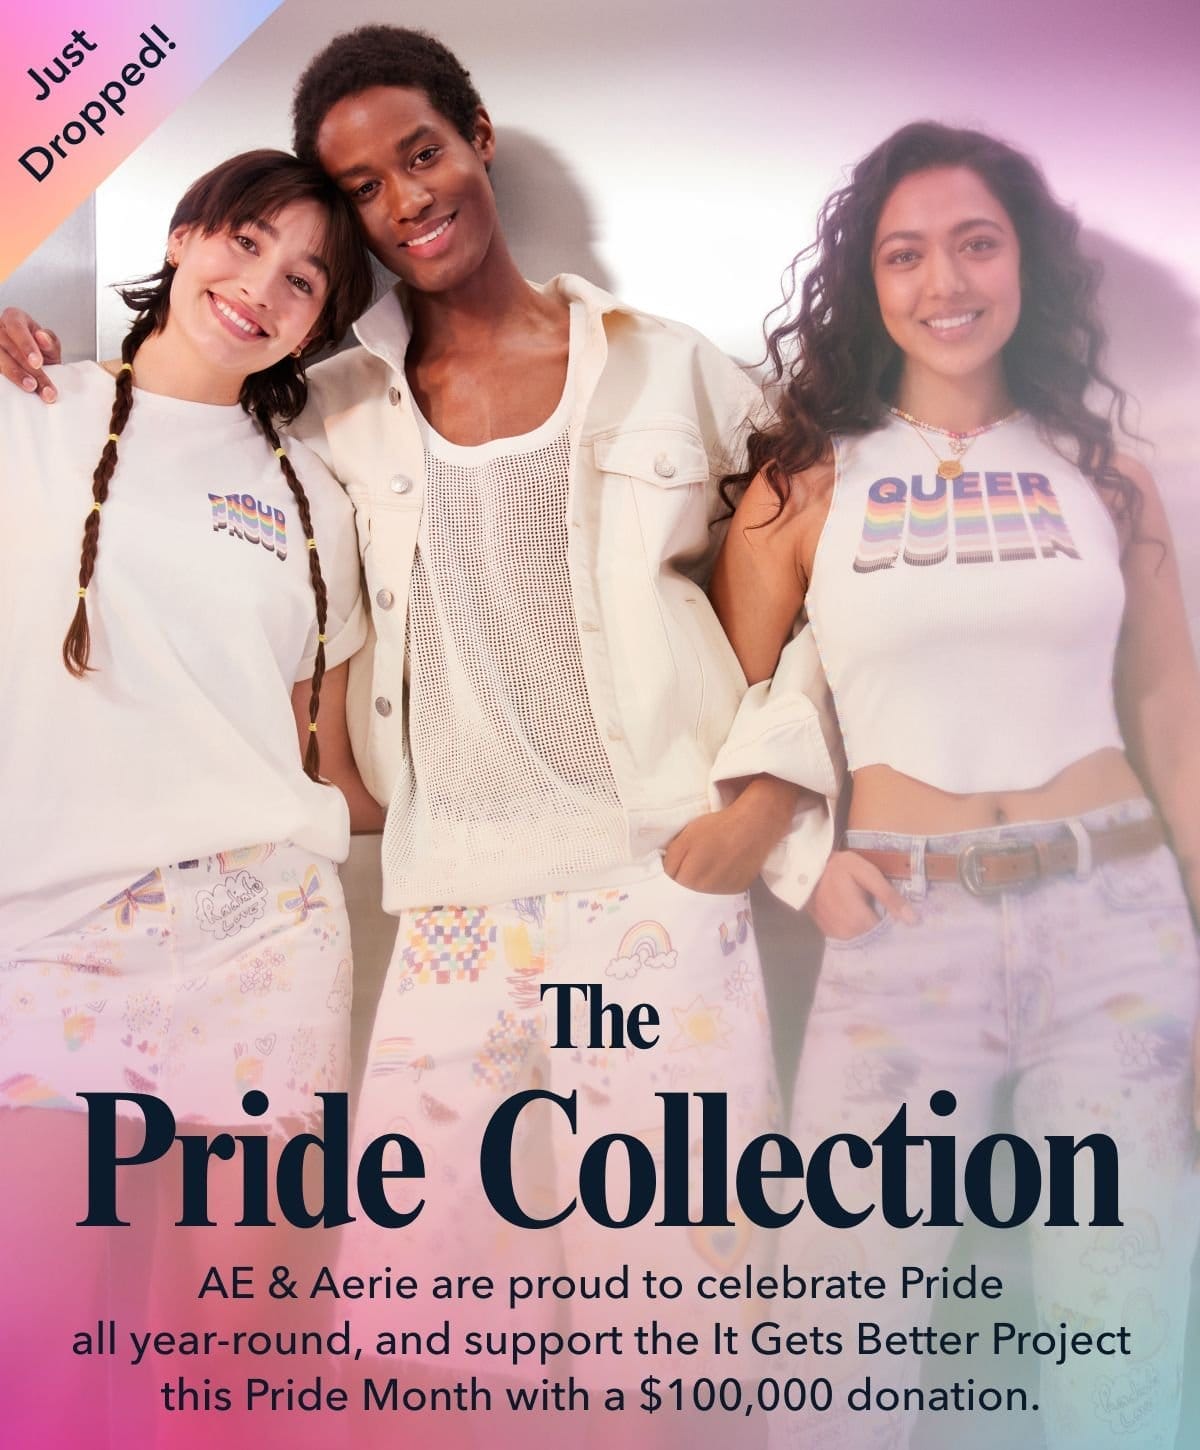 Just Dropped! The Pride Collection | AE & Aerie are proud to celebrate Pride all year-round, and support the It Gets Better Project this Pride Month with a \\$100,000 donation.